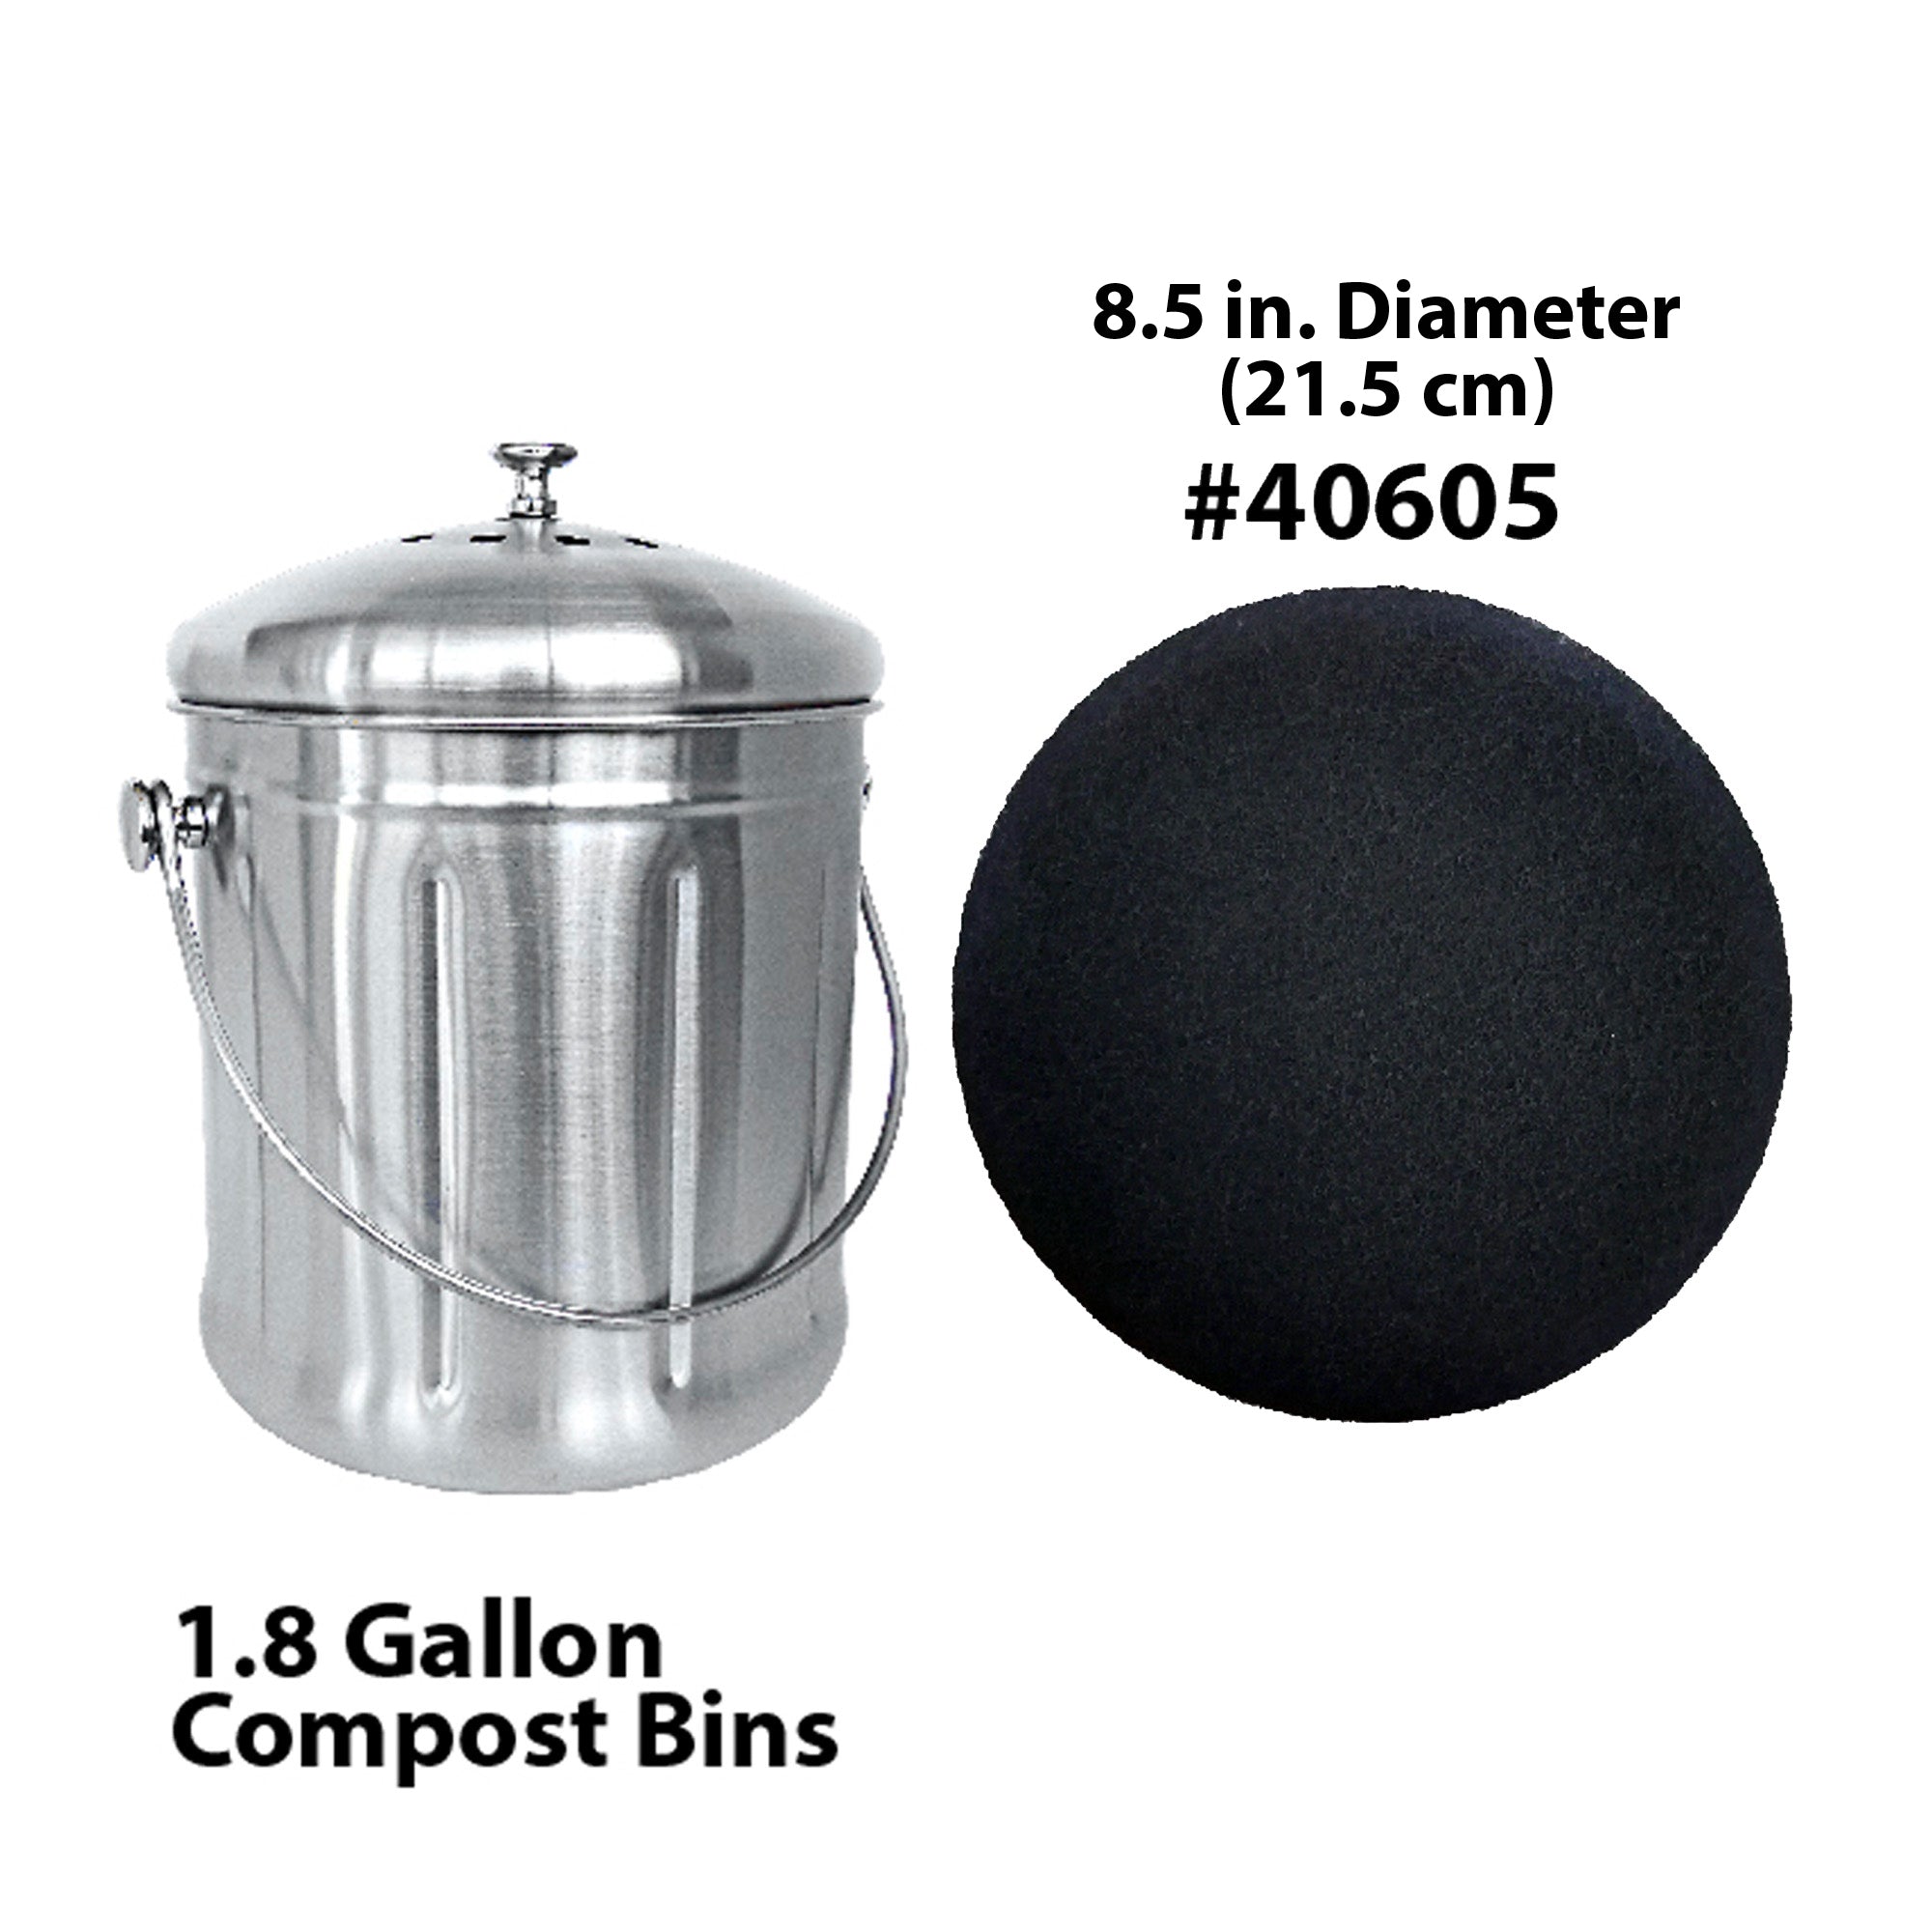 Natural Home Brands Stainless Steel Compost Bin - 1.8 Gallon